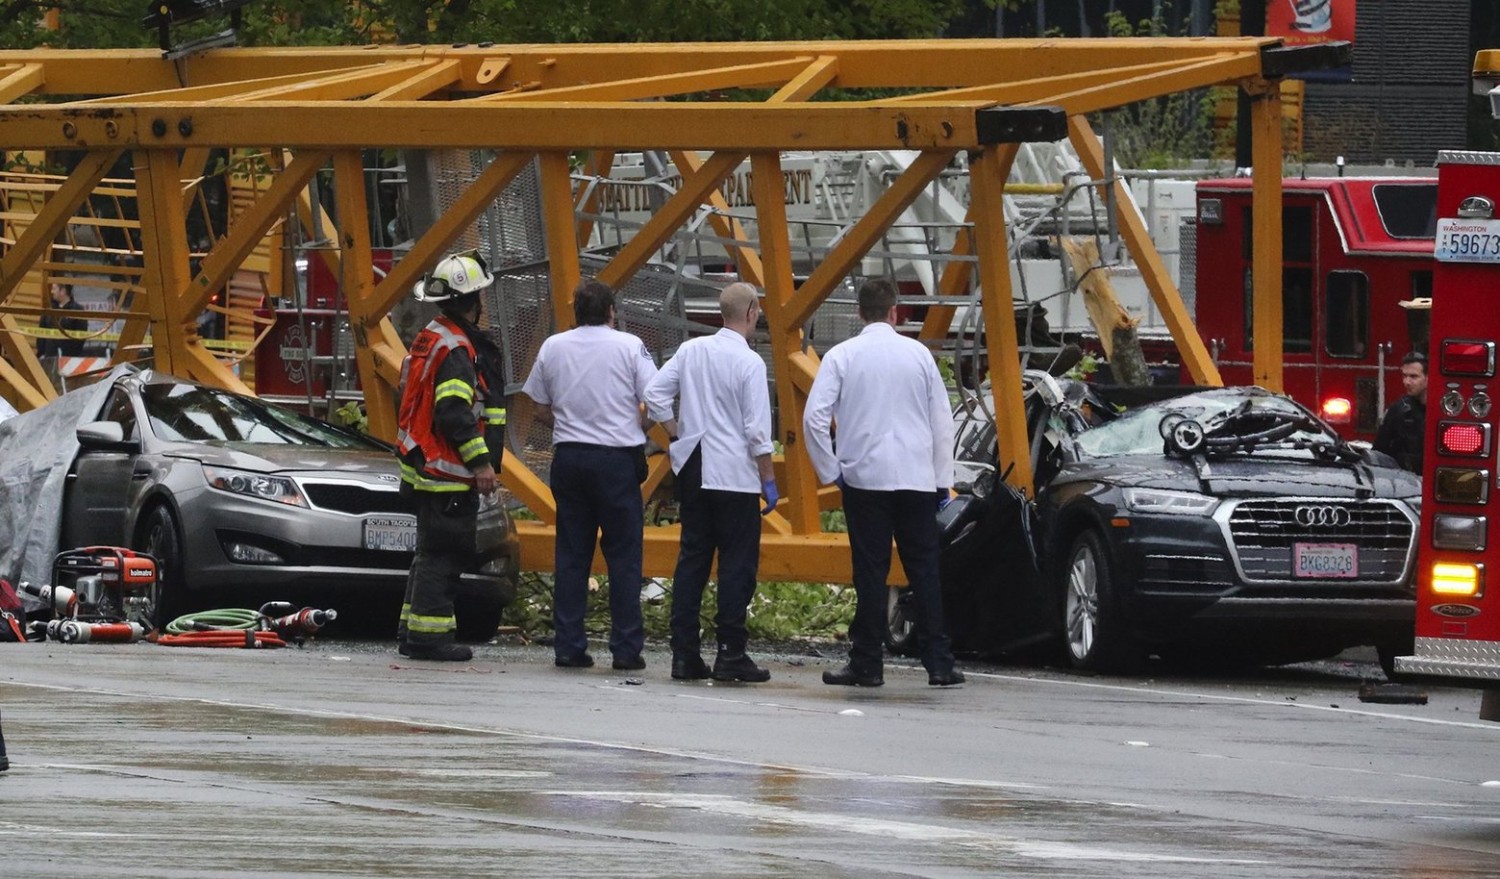 Emergency crews investigate the scene of a collapsed crane at Fairview Avenue North and Mercer Street in Seattle’s South Lake Union neighborhood Saturday afternoon. (Alan Berner / The Seattle Times)